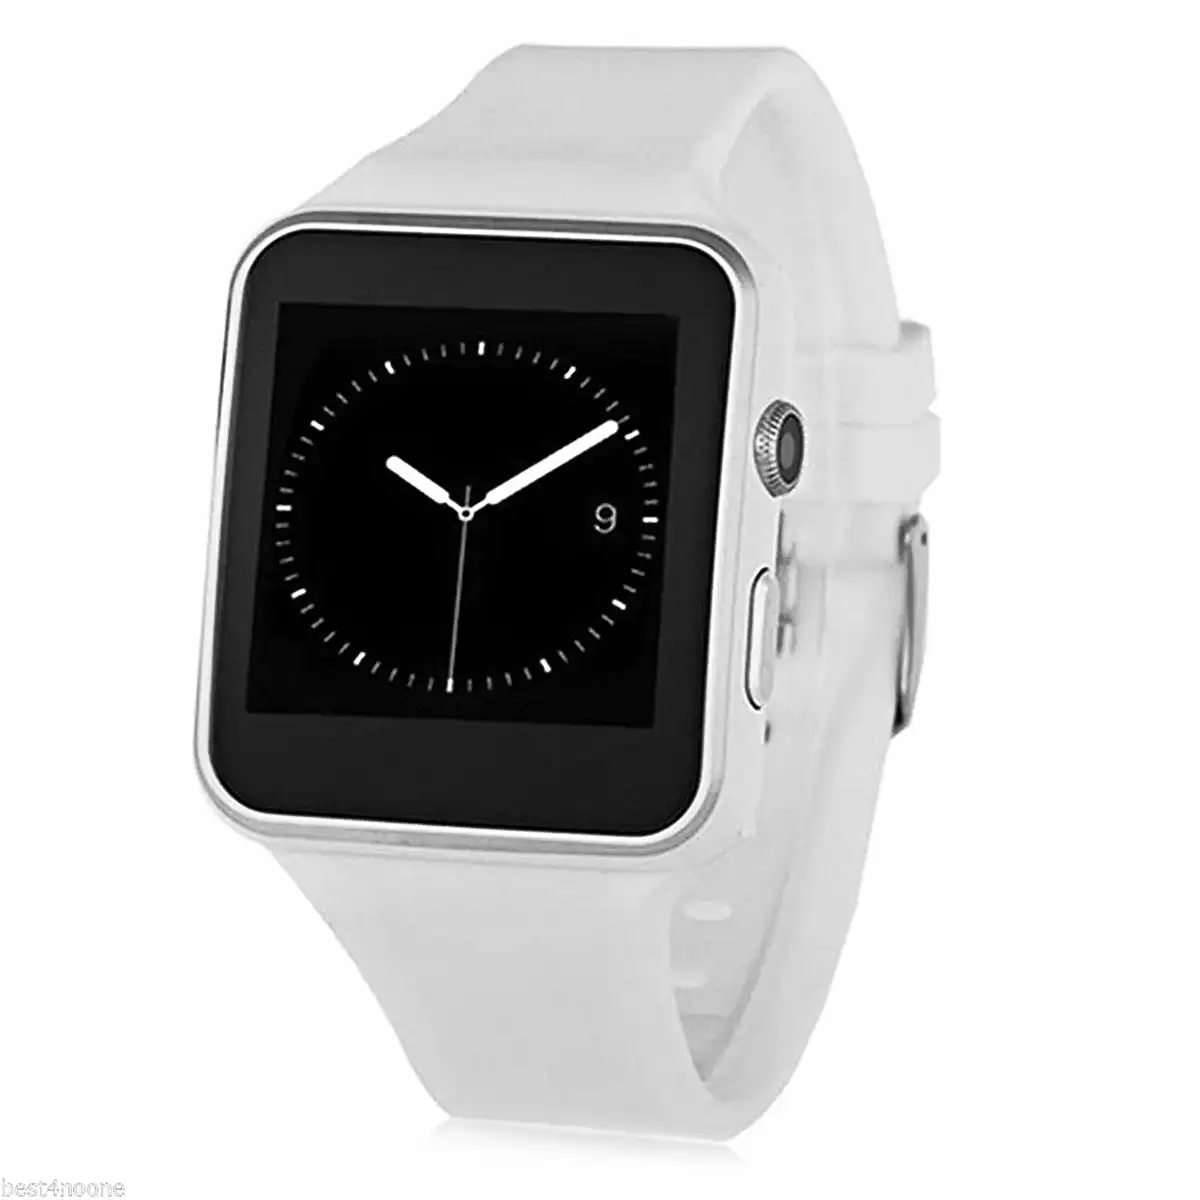 Bluetooth V3.0 Smart Watch 1.54" Ips Hd Lcd Rechargeable Handsfree Call - White